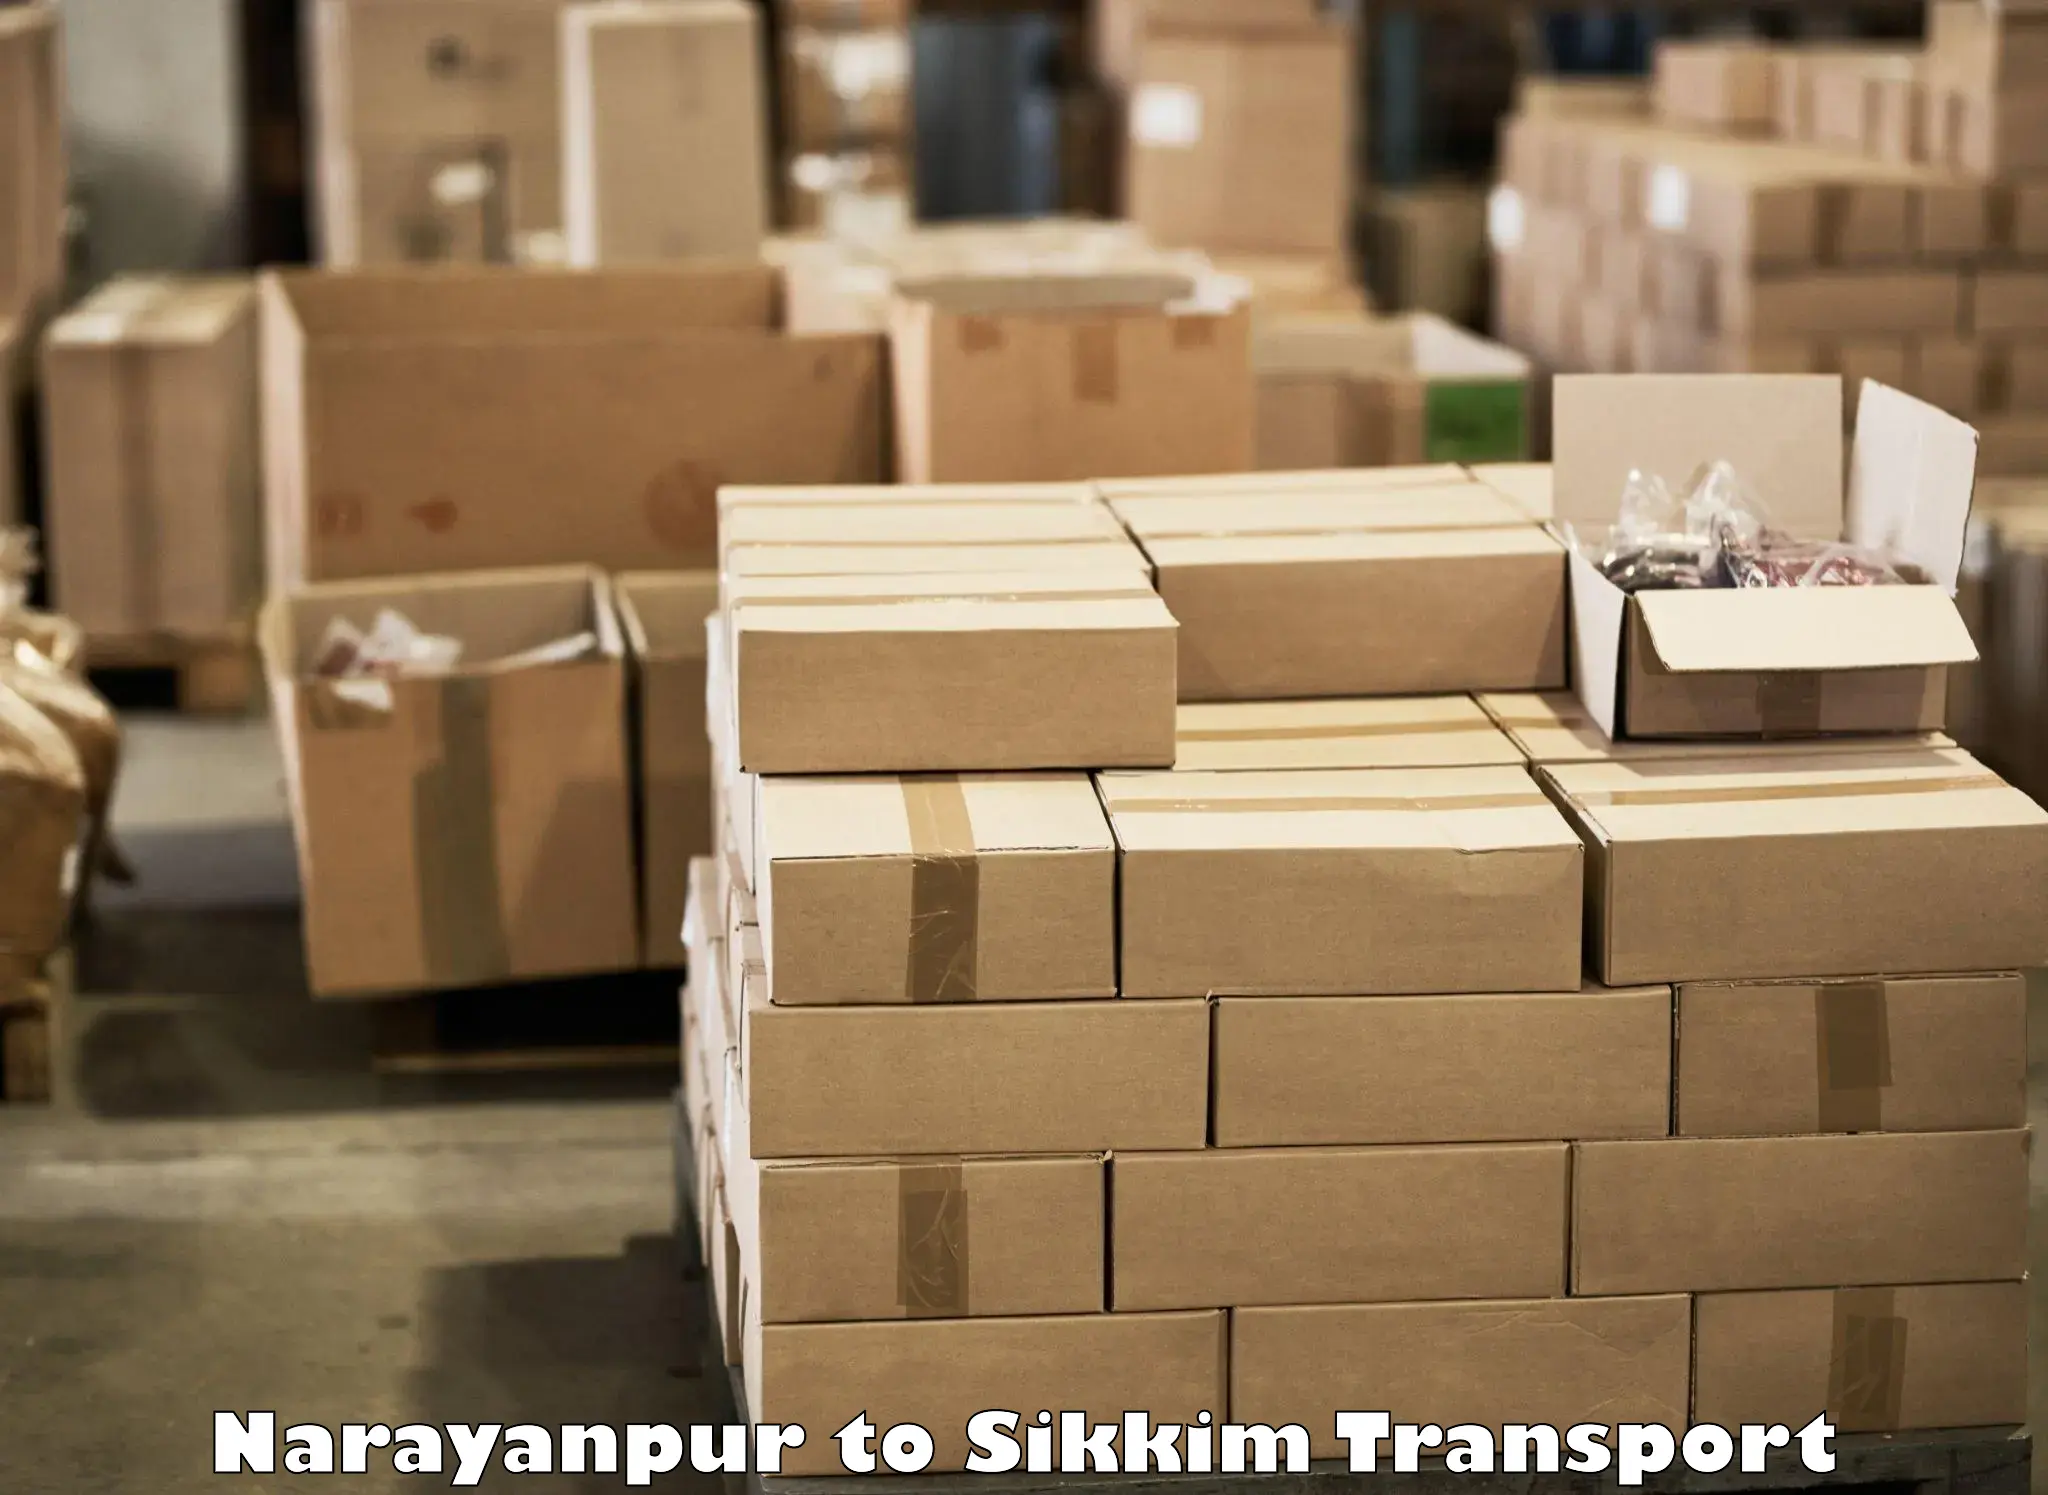 Truck transport companies in India Narayanpur to Pelling